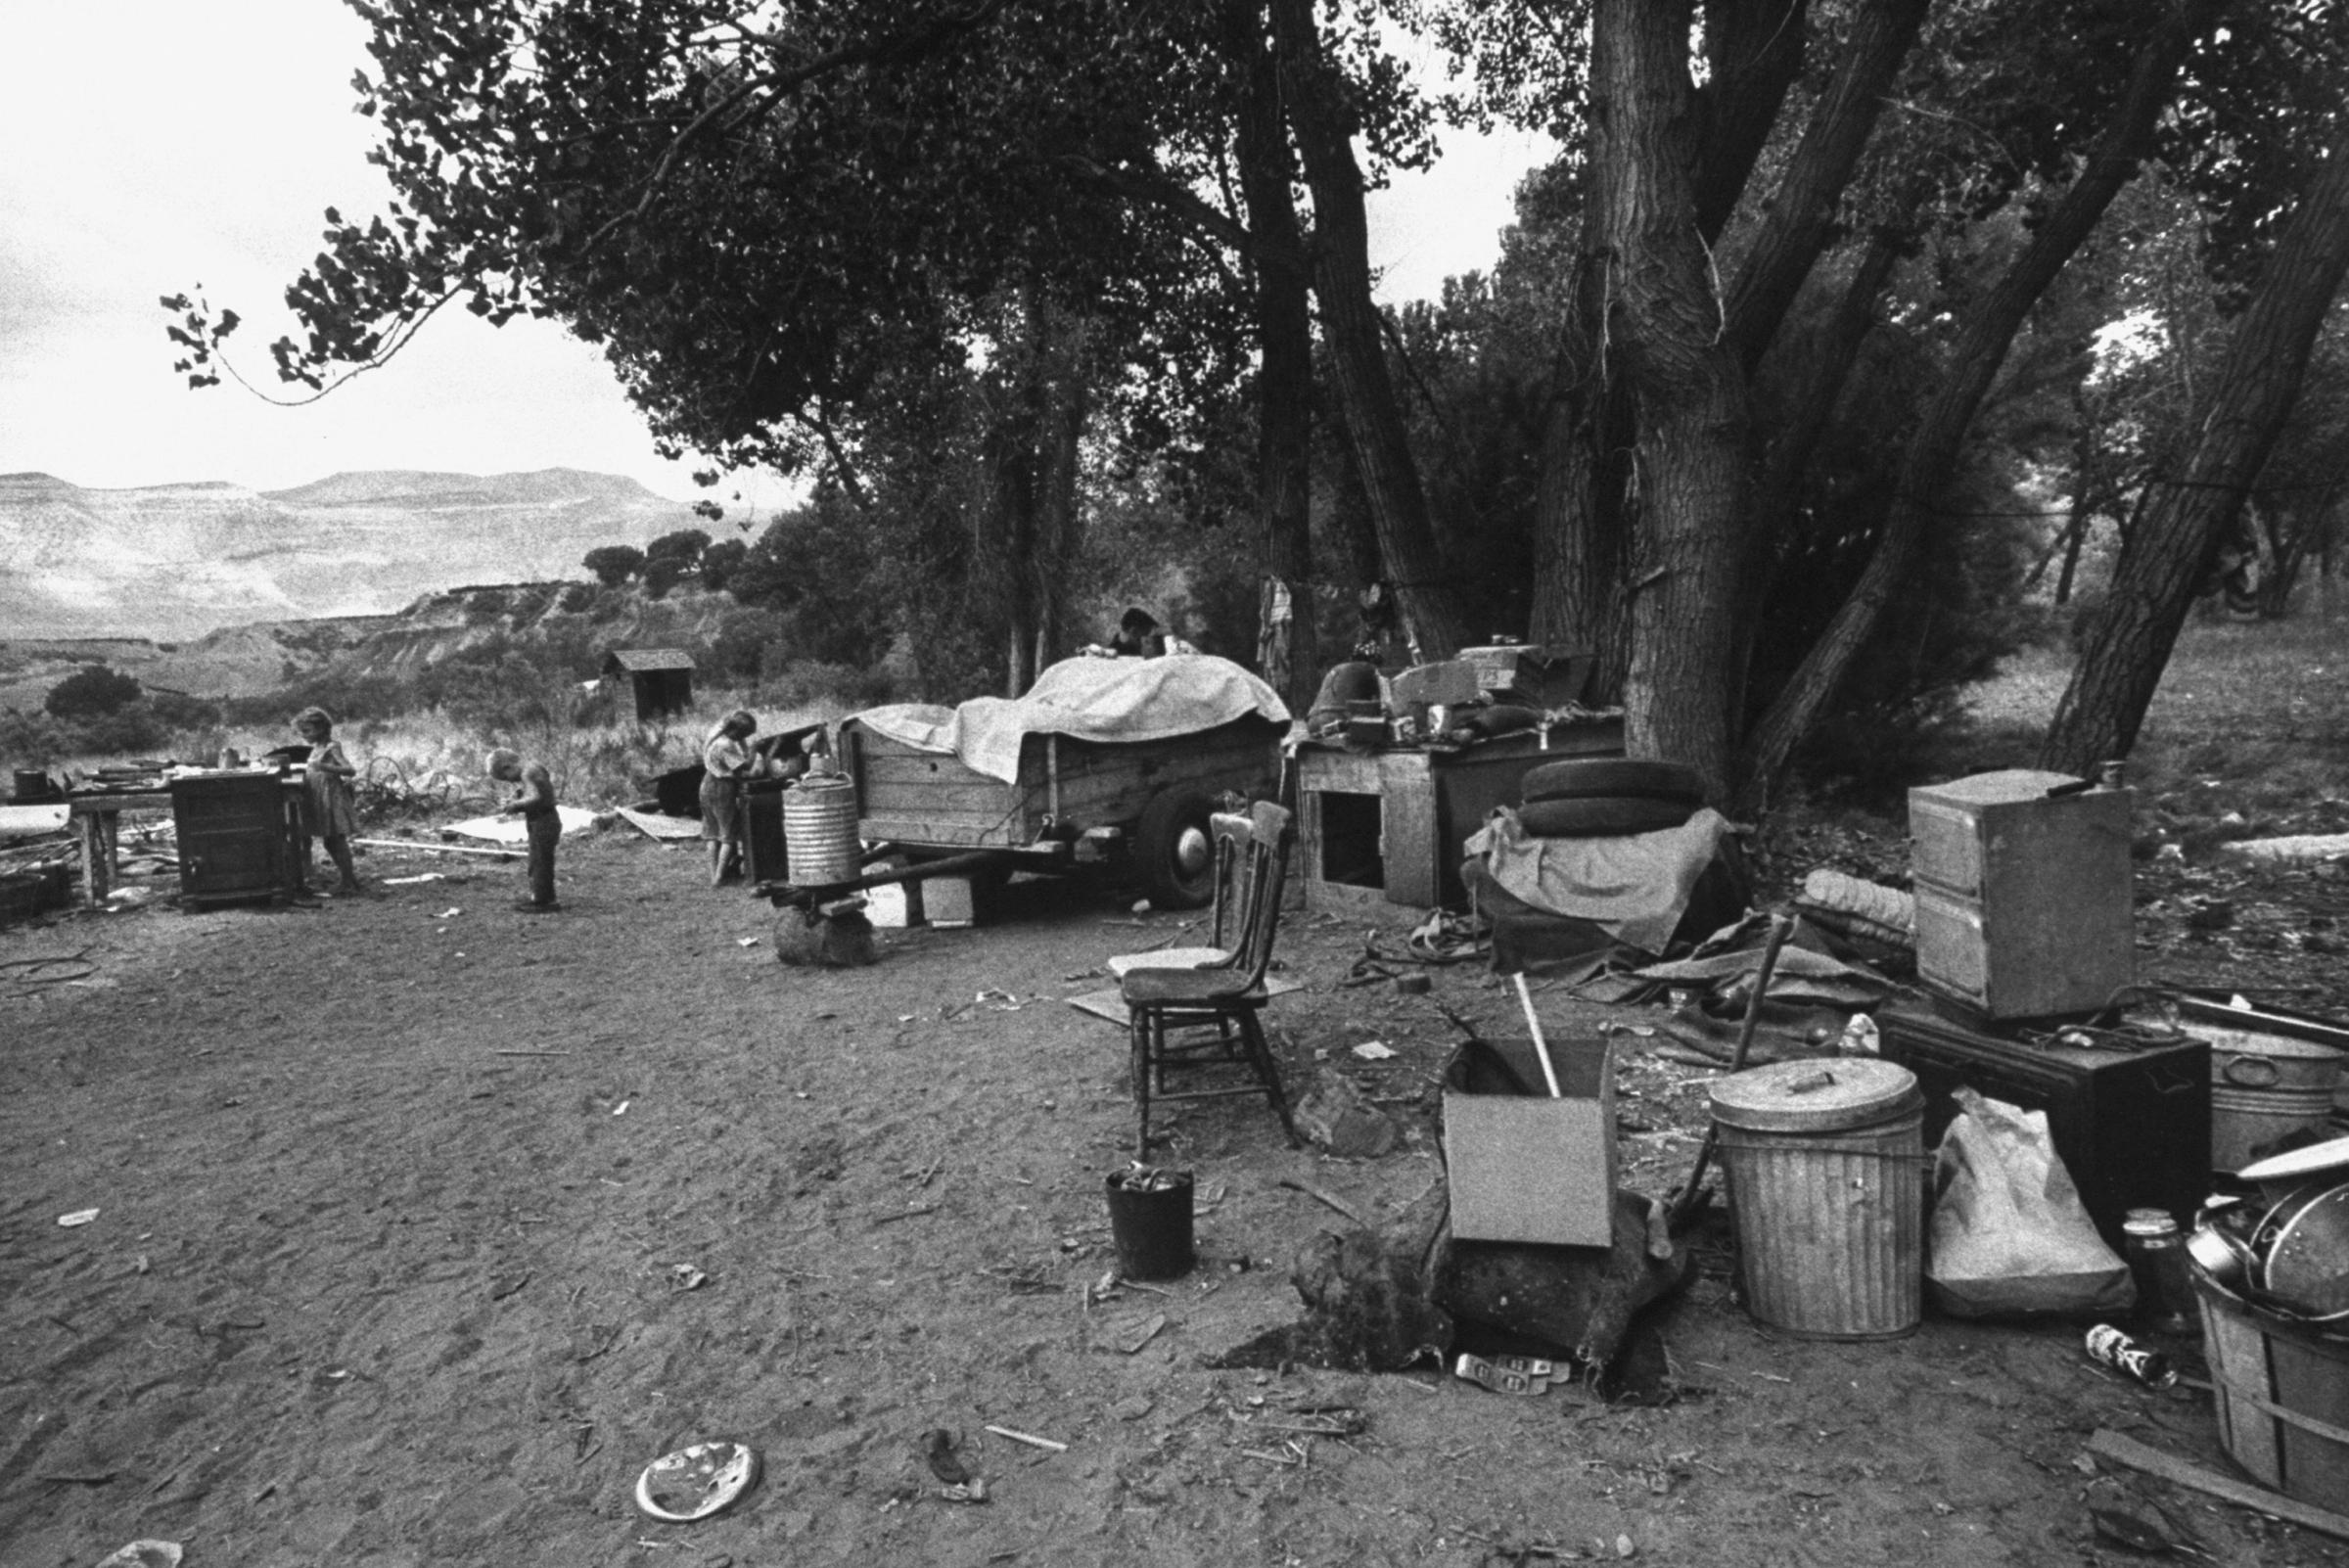 Squalid conditions for migrant farm workers and their families, California, 1959.